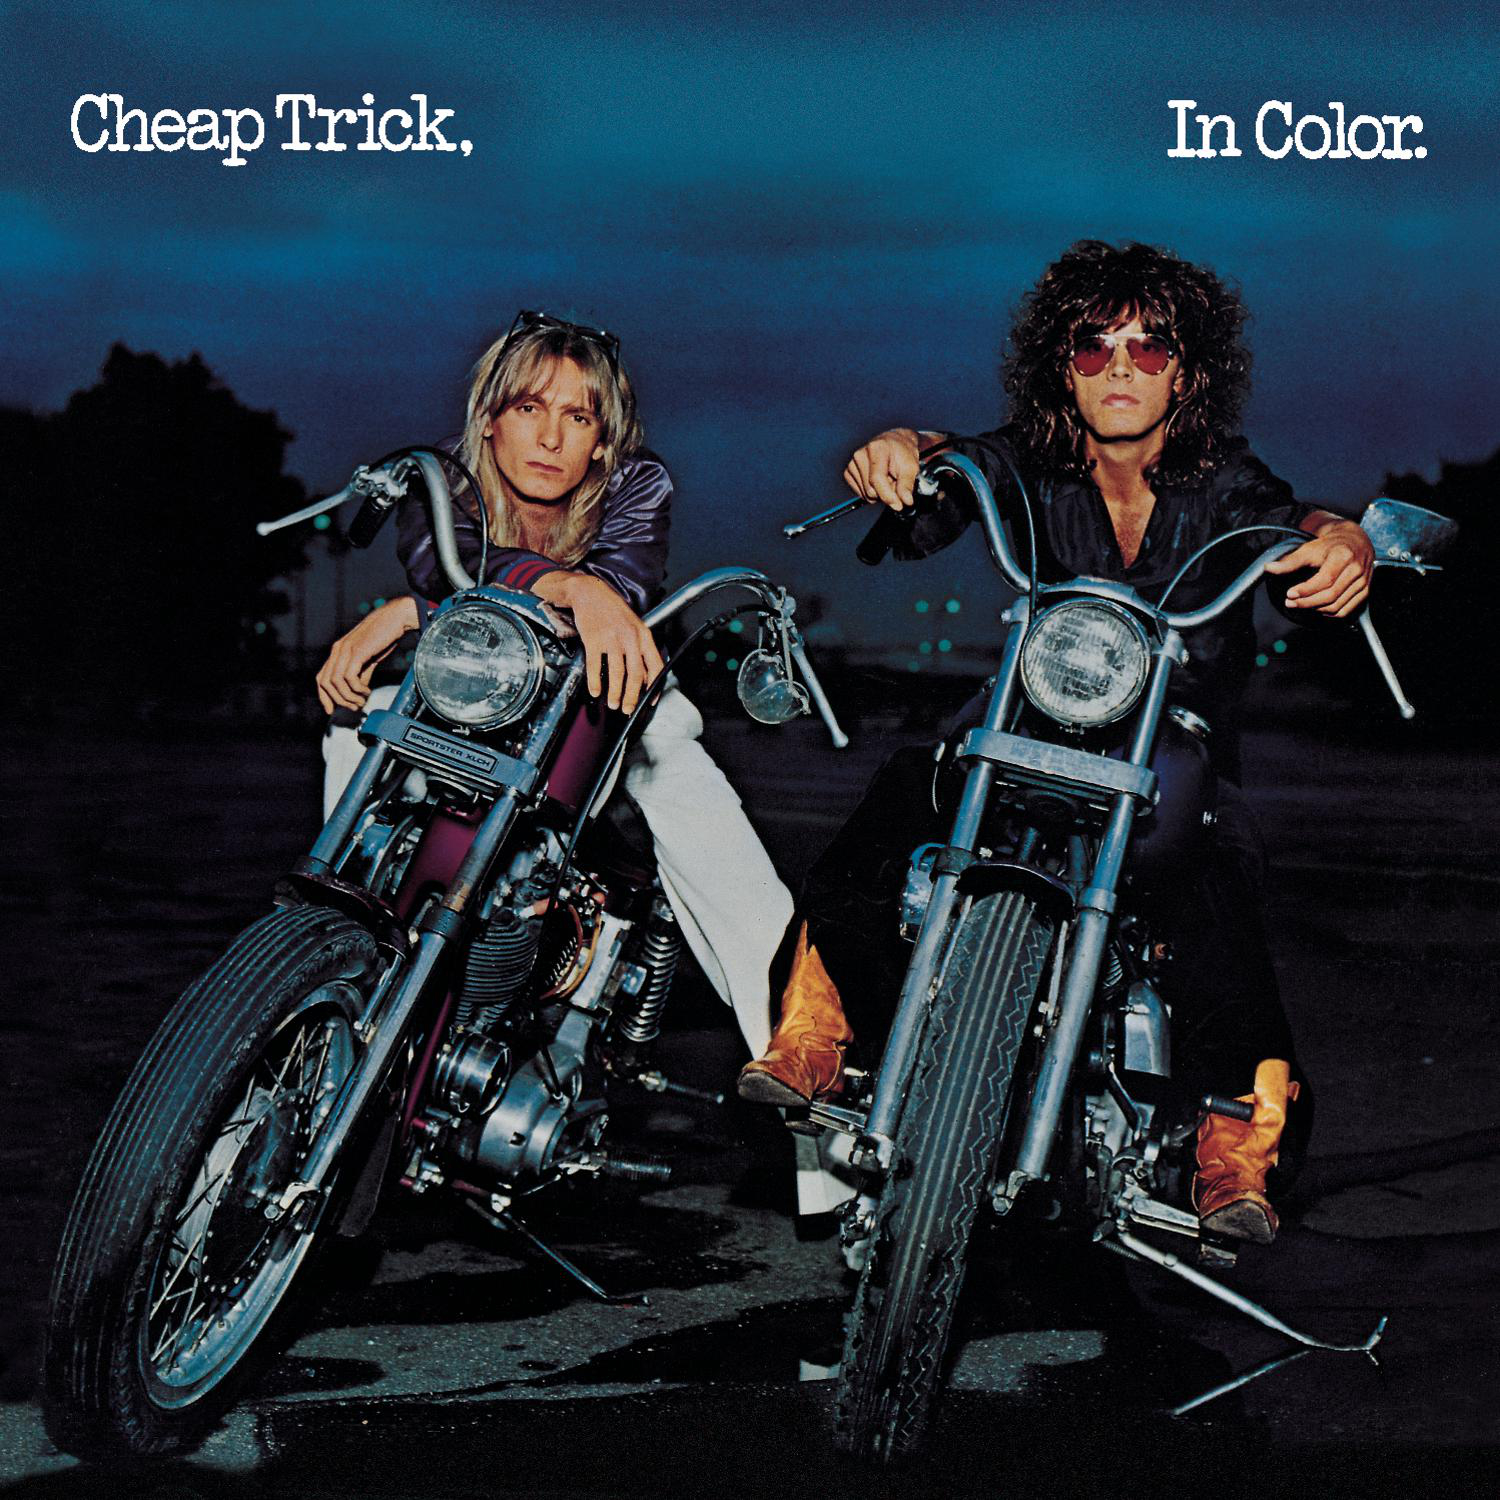 Cheap Trick-In Color-24-44-WEB-FLAC-REMASTERED-2015-OBZEN Download